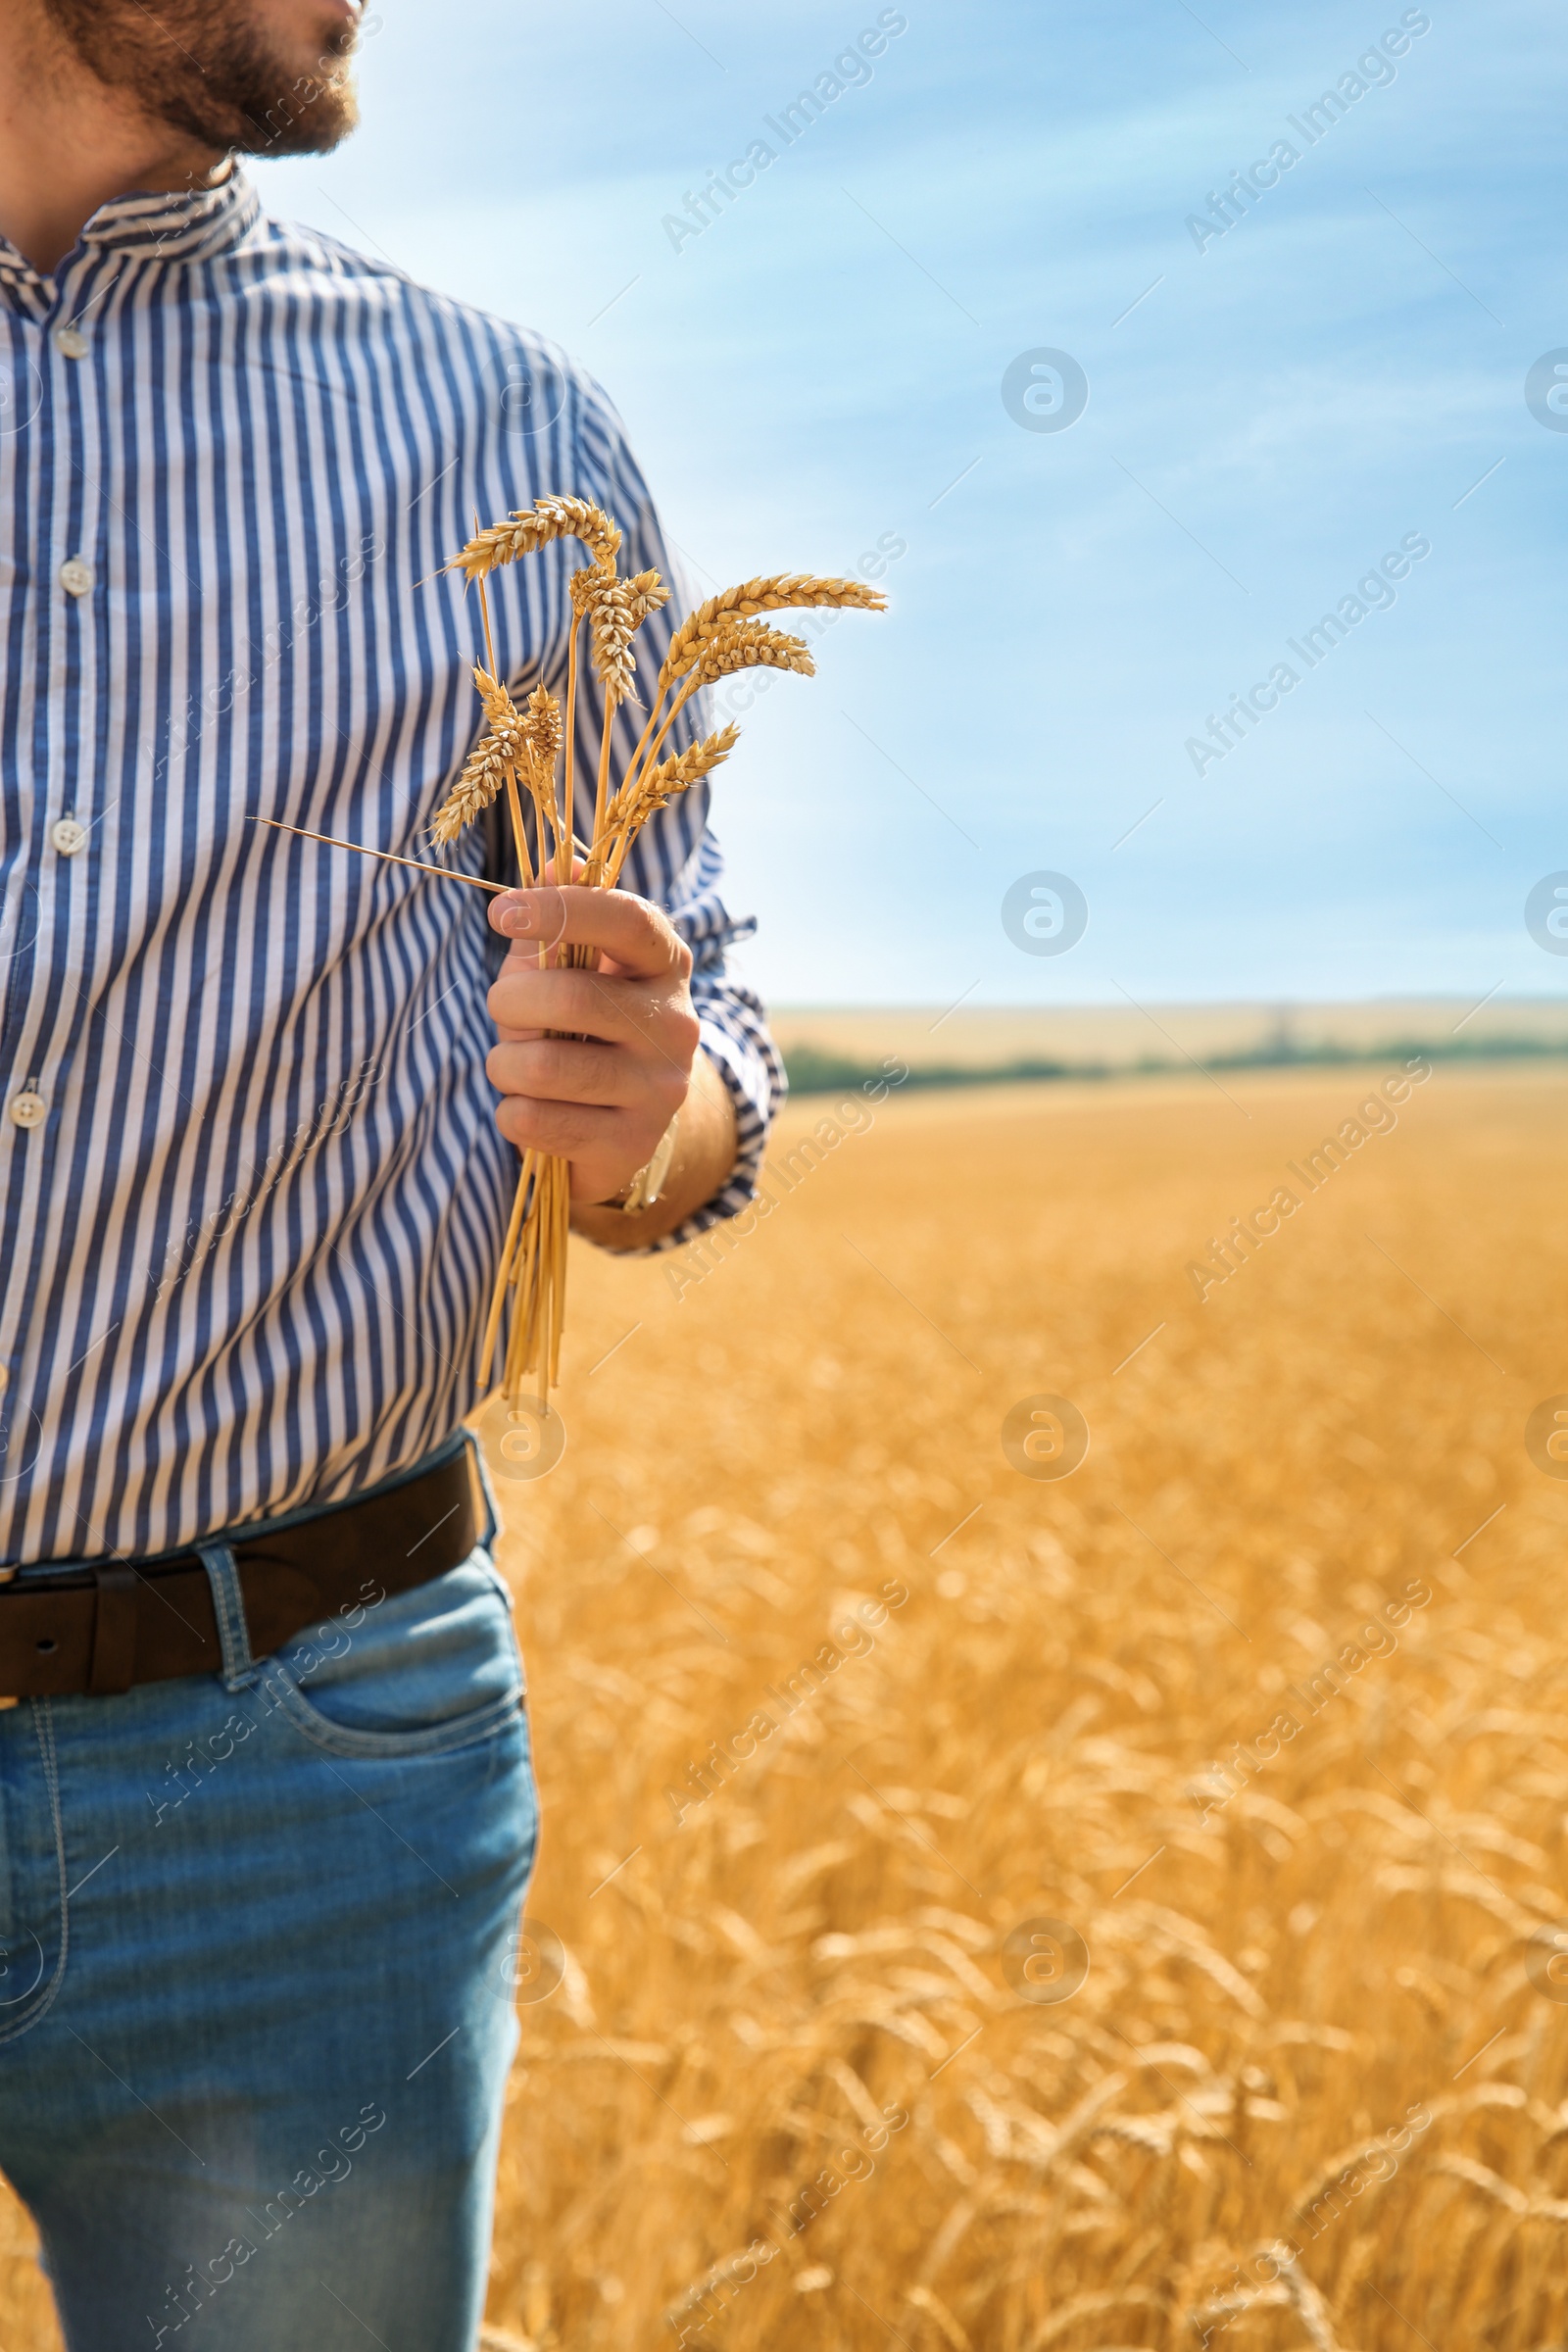 Photo of Young man with spikes in grain field. Cereal farming